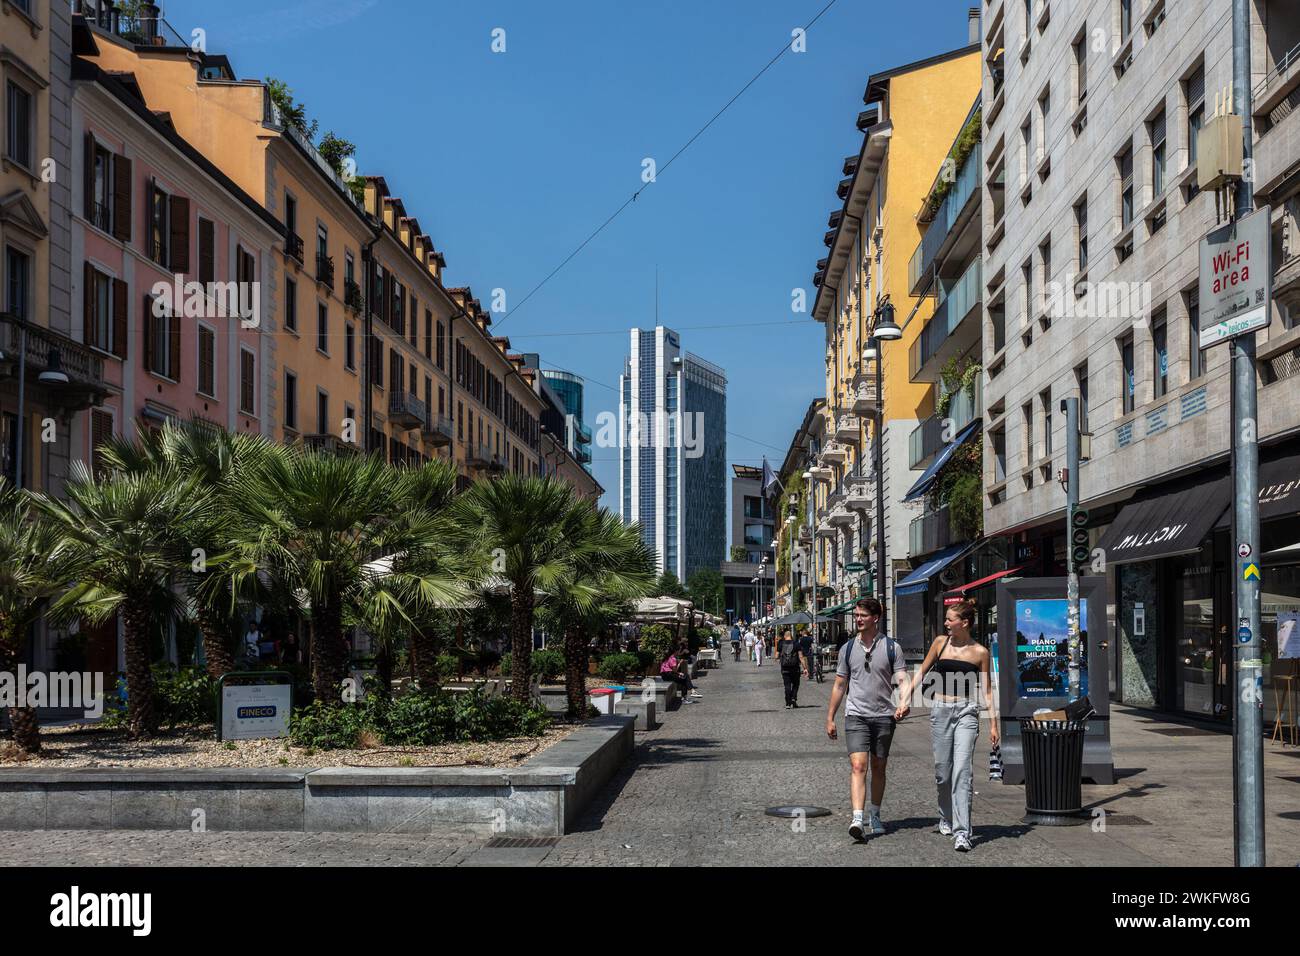 Corso Como in Milan, a lively shopping street with restaurants and shops selling fashion, art and design. The Garibaldi tower can be seen at the back. Stock Photo